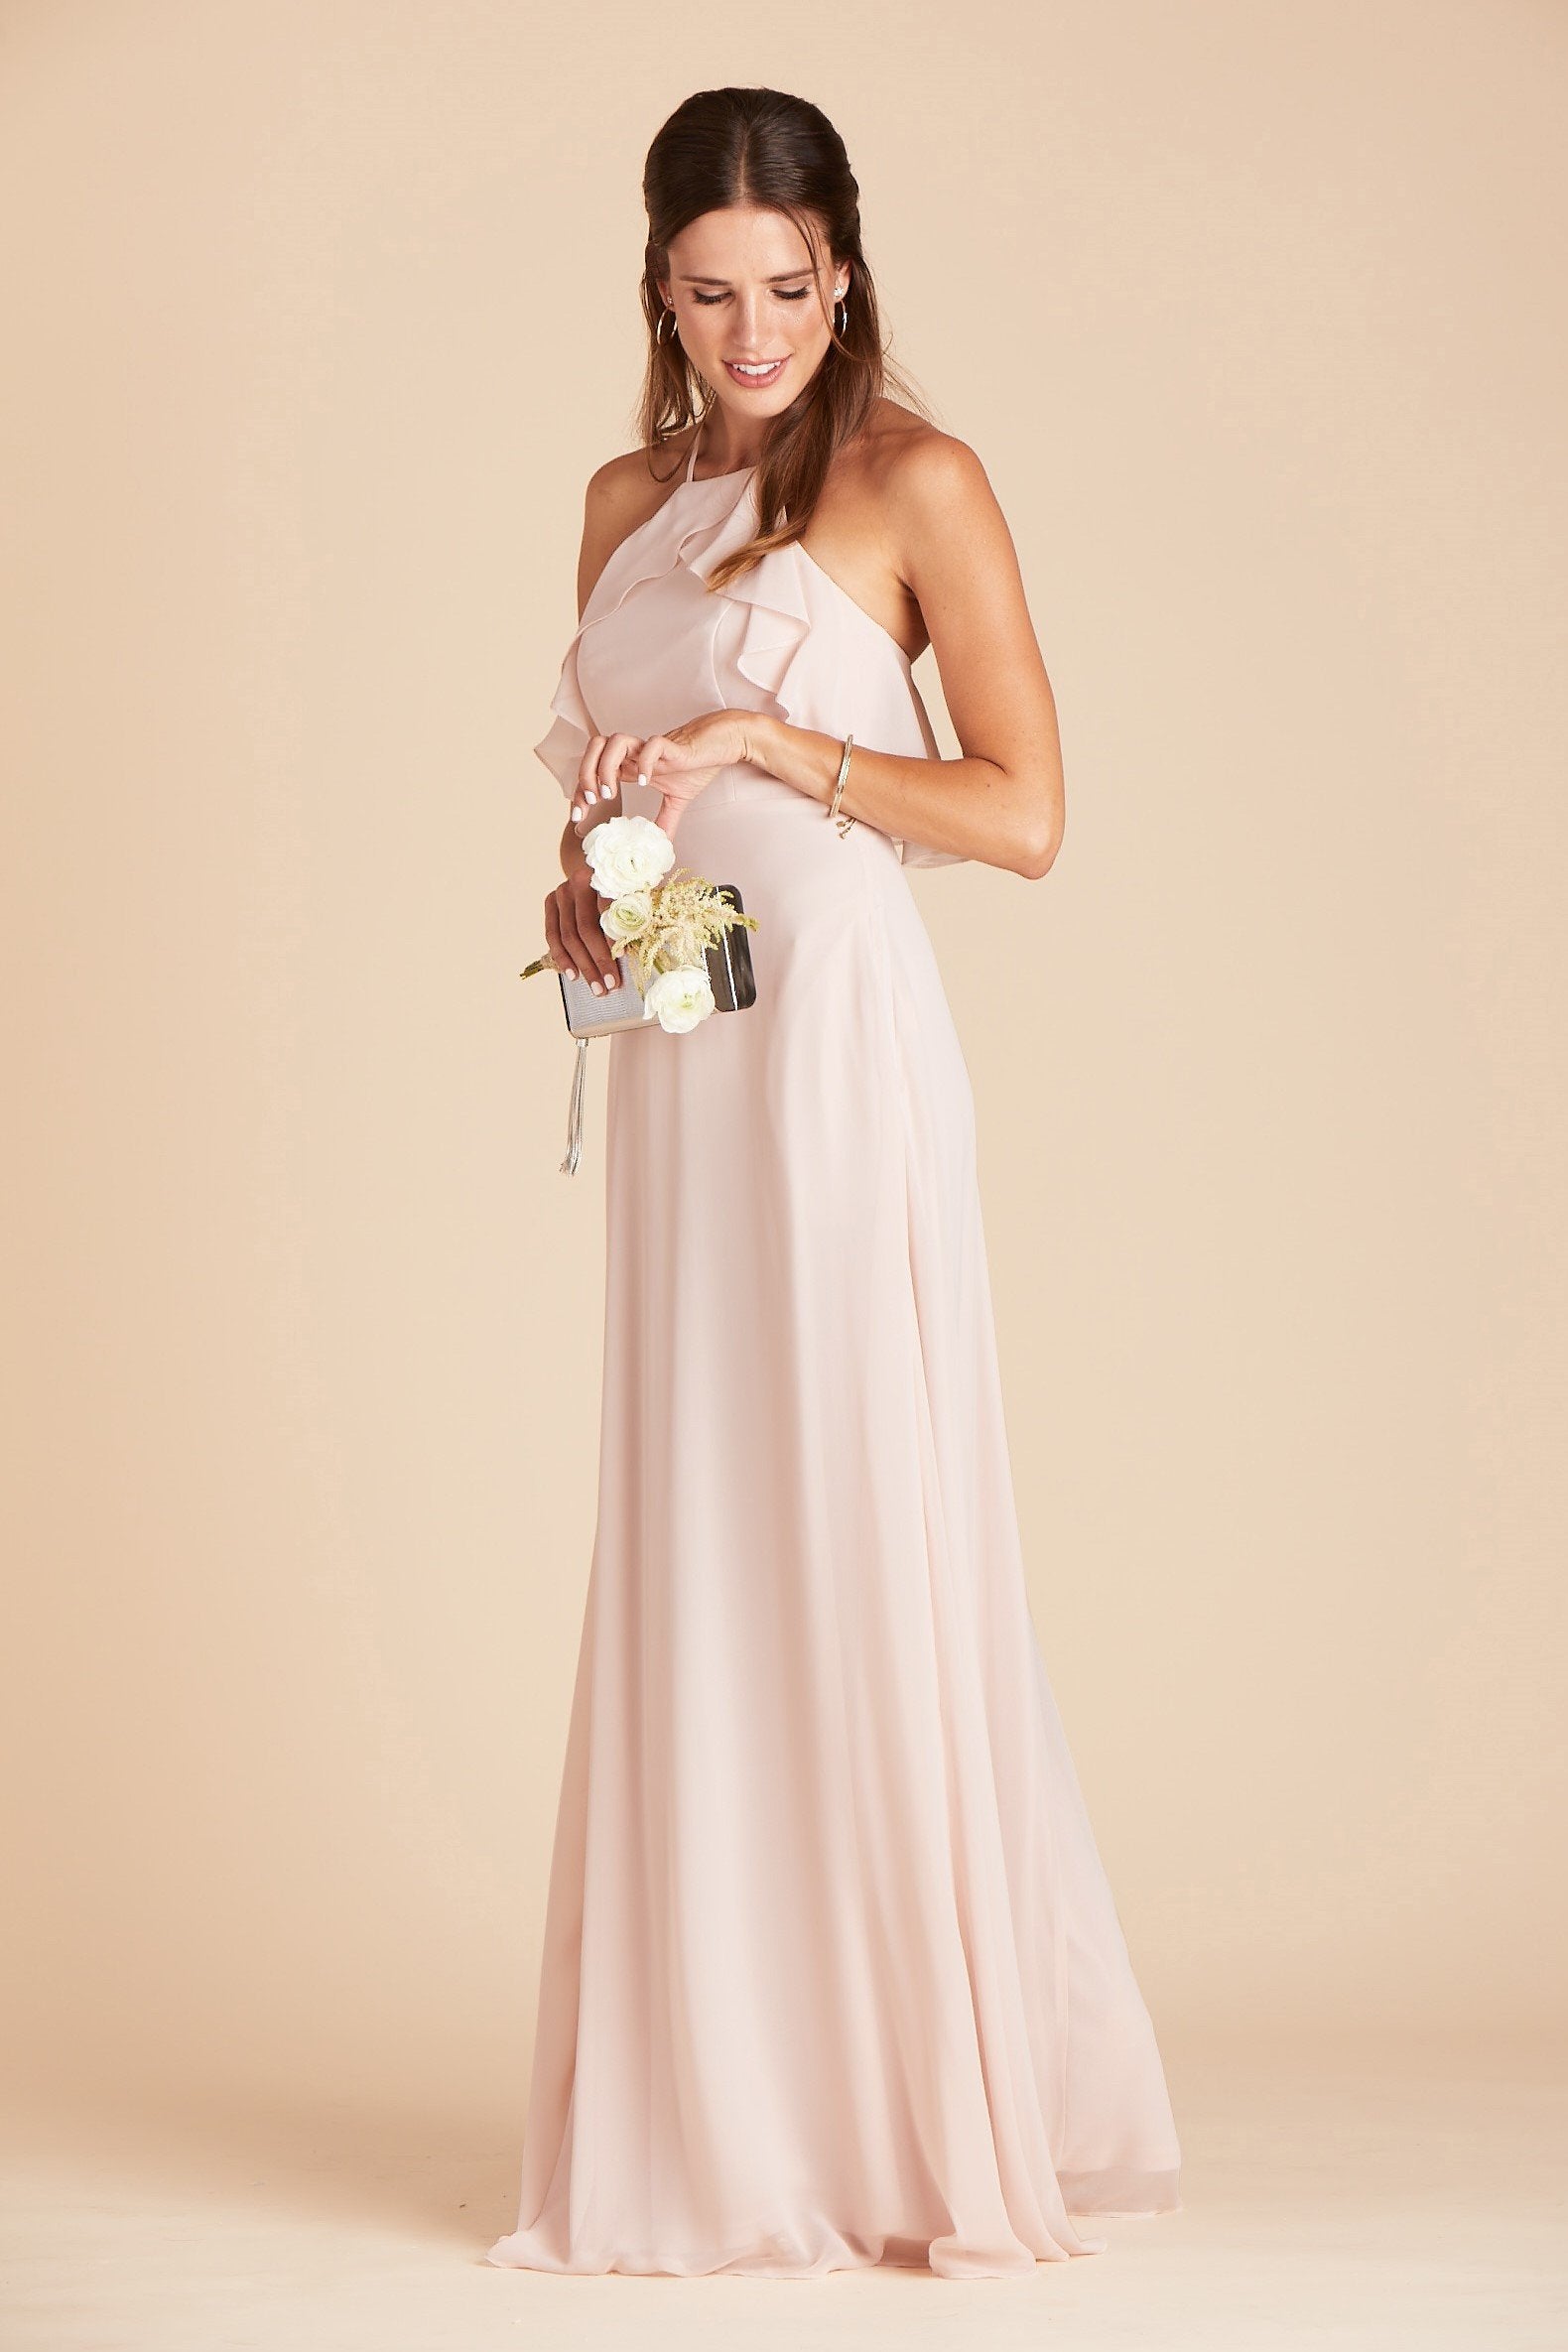 Jules bridesmaid dress in pale blush chiffon by Birdy Grey, side view